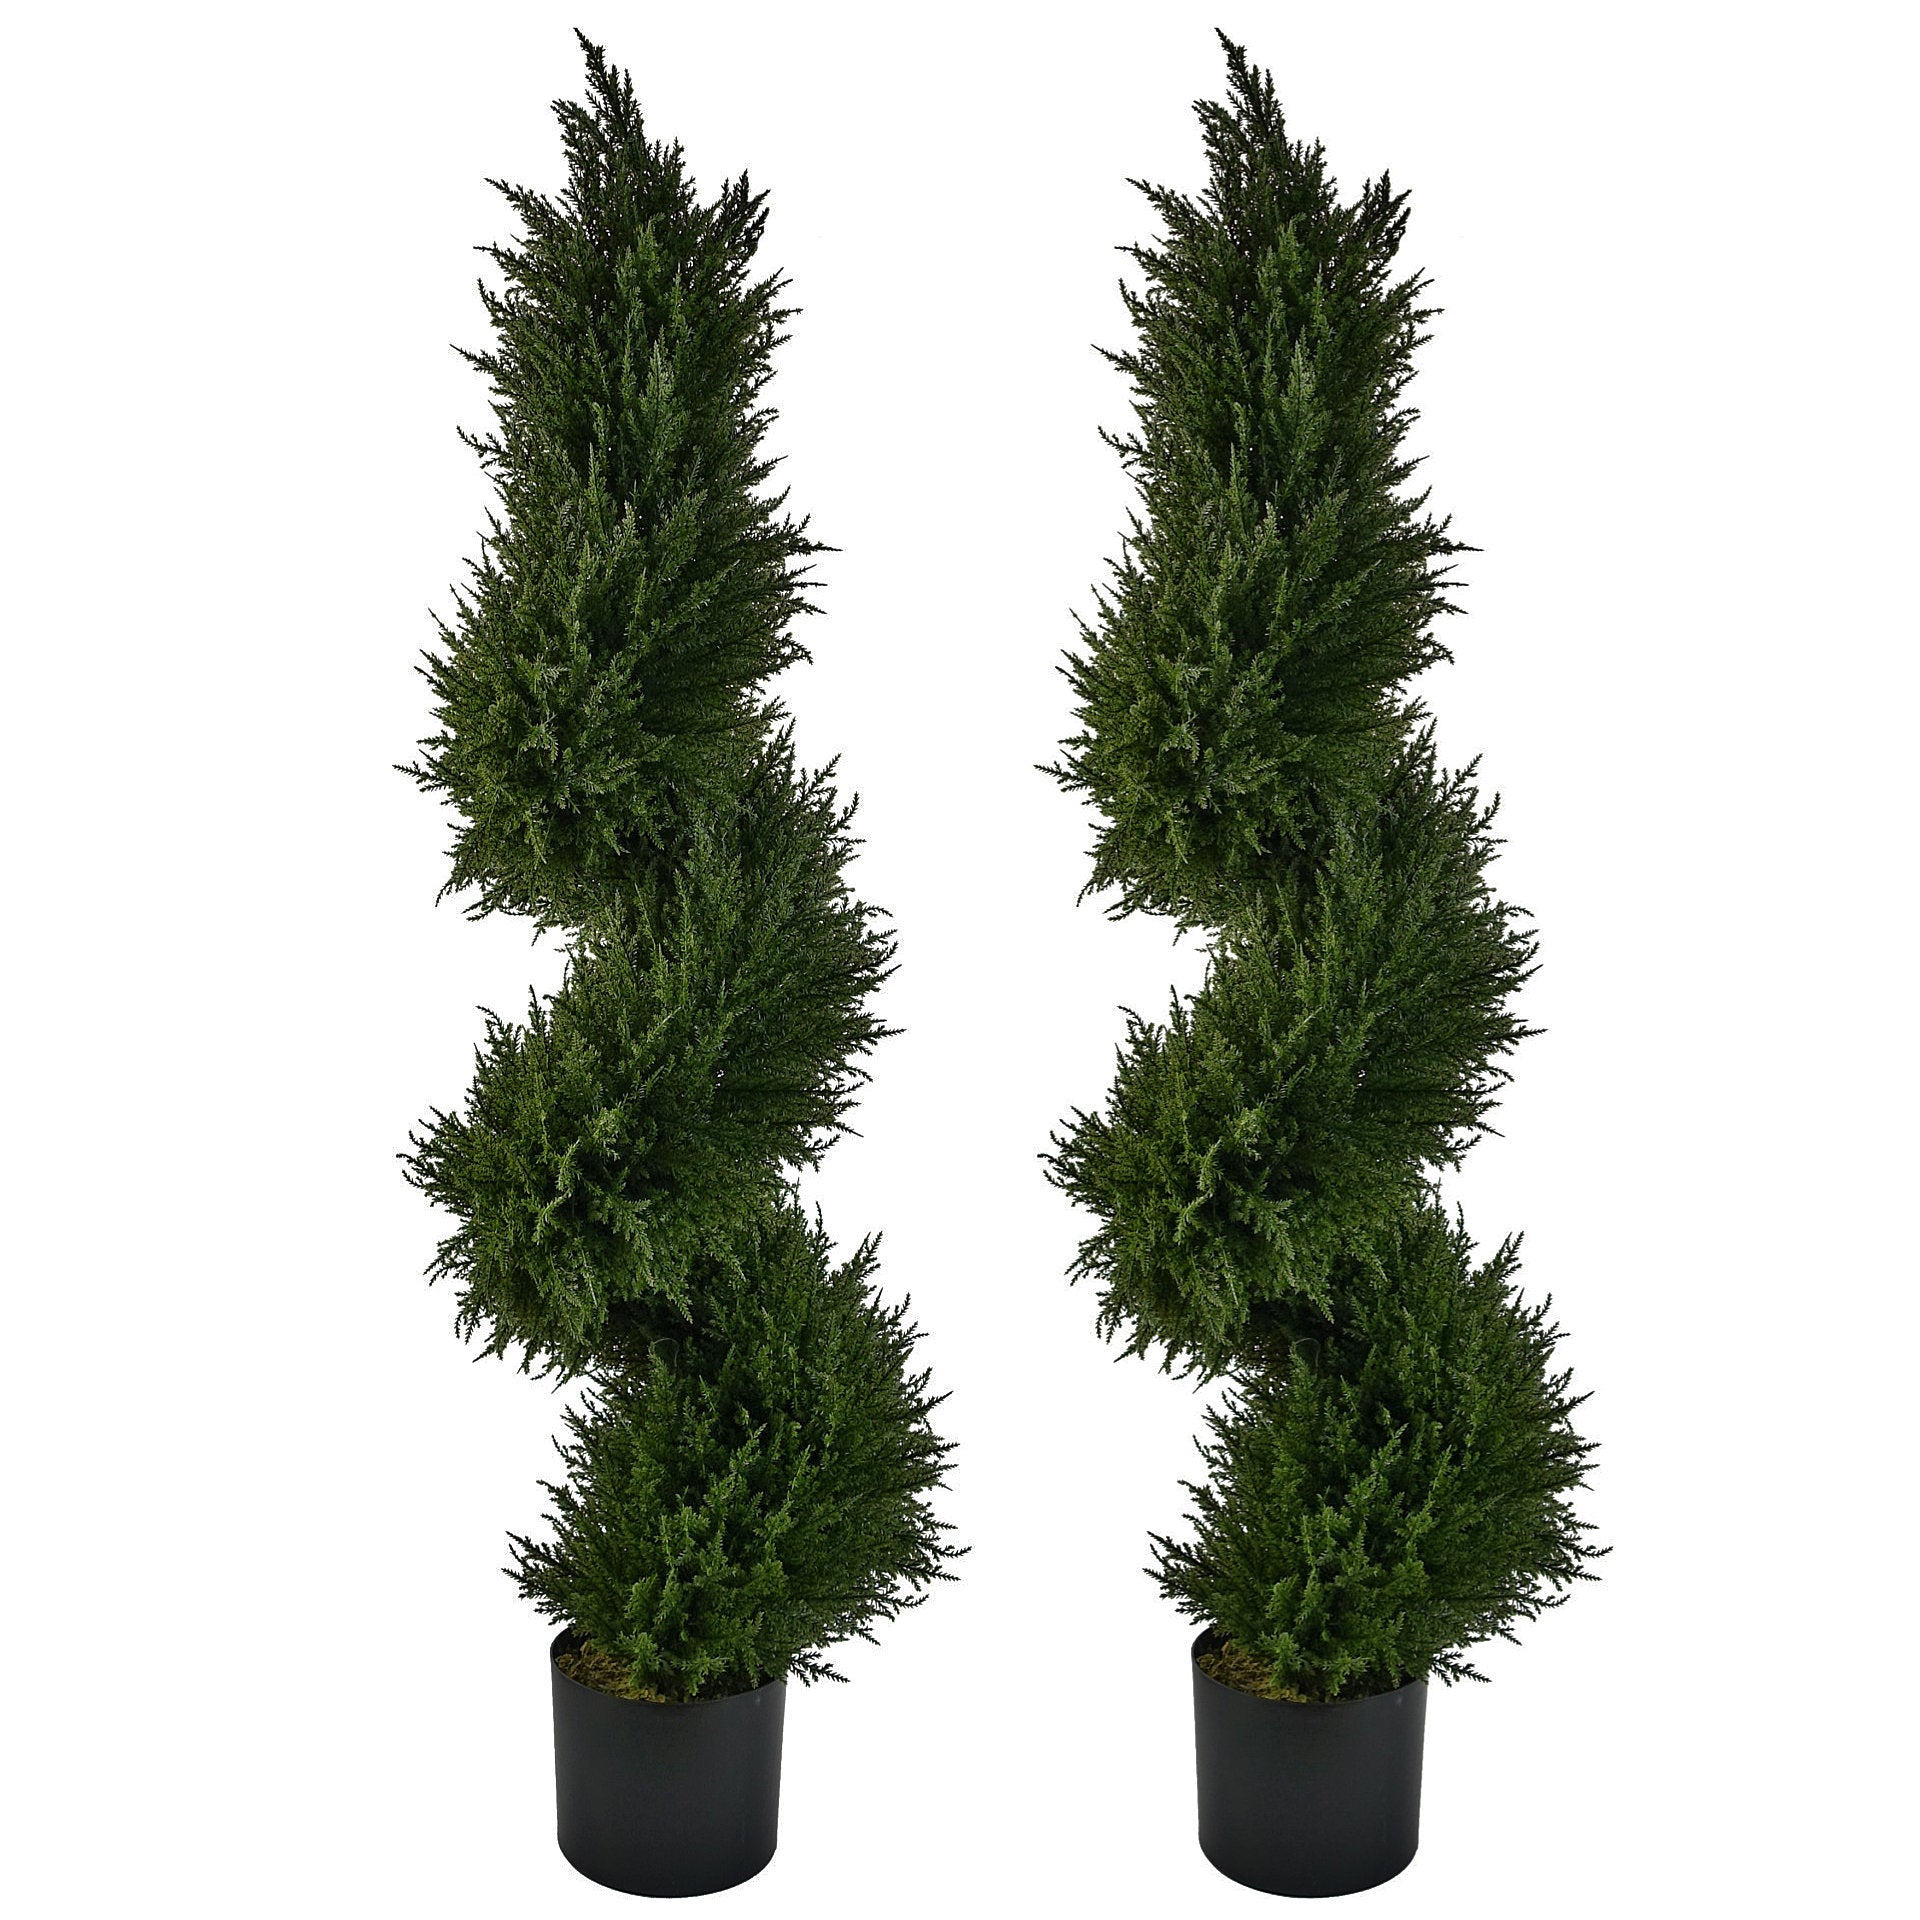 Pair of Artificial Cypress Spiral Topiary Trees 120cm